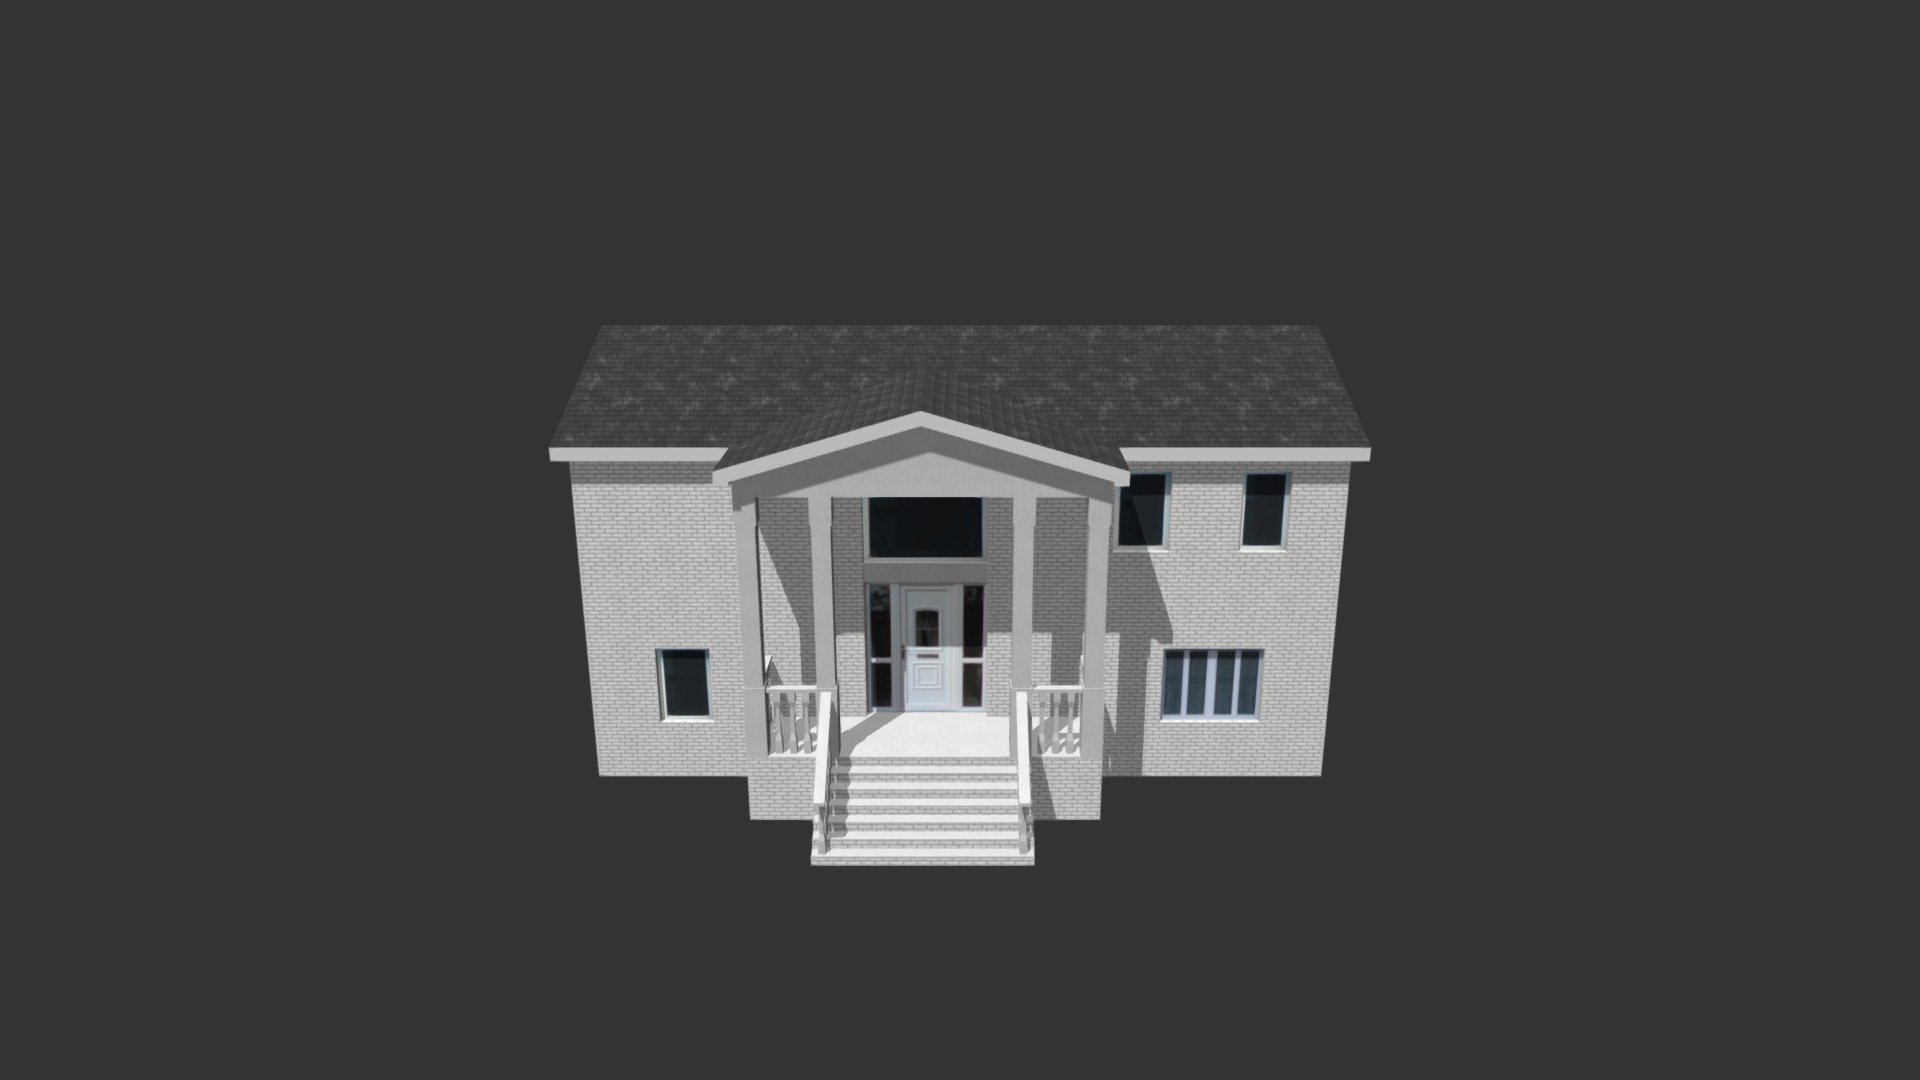 House 10

A low-poly 3d model ready for Virtual Reality (VR), Augmented Reality (AR), games and other real-time apps.

This model is based on a real life building and uses 2210 triangles (1202 polygons) and 5 materials.

Scaled to a default scale of 1 unit = 1 meter

This set comes with :

Model files in 3DS format files (.3ds) 
Model files in FBX format files (.fbx) 
Model files in OBJ format files (.obj &amp; .mtl) 

Textures : 
Diffuse Maps 
Normal Maps

All Textures are preloaded on the materials and prefabs so this prop is ready to be dropped in to any of your scenes.

Optimised for game engines but can also be used in any 3d package 3d model